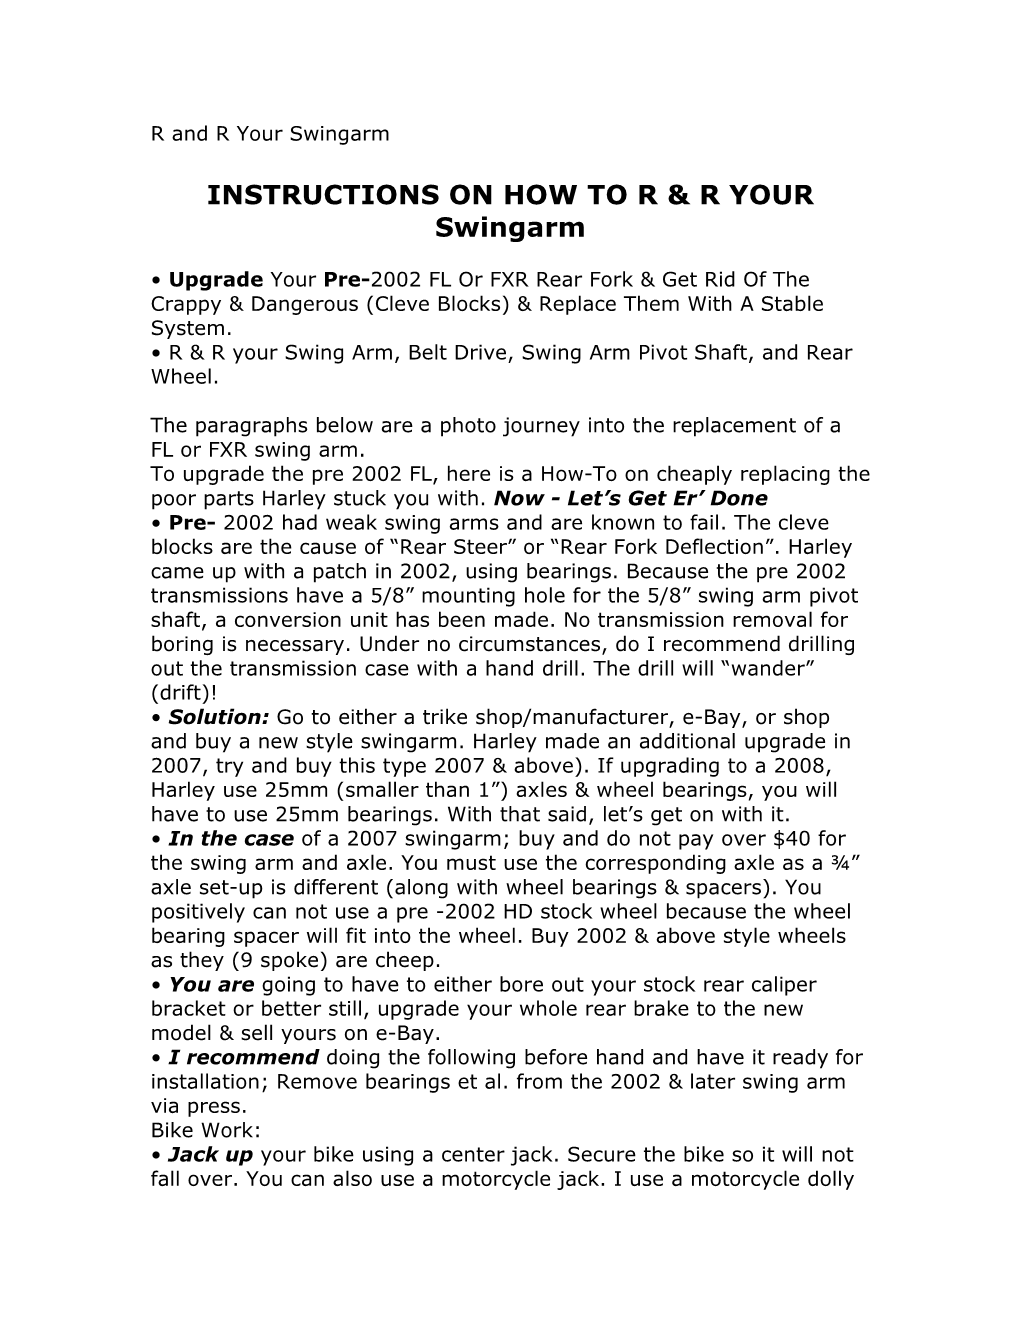 INSTRUCTIONS on HOW to R & R YOUR Swingarm